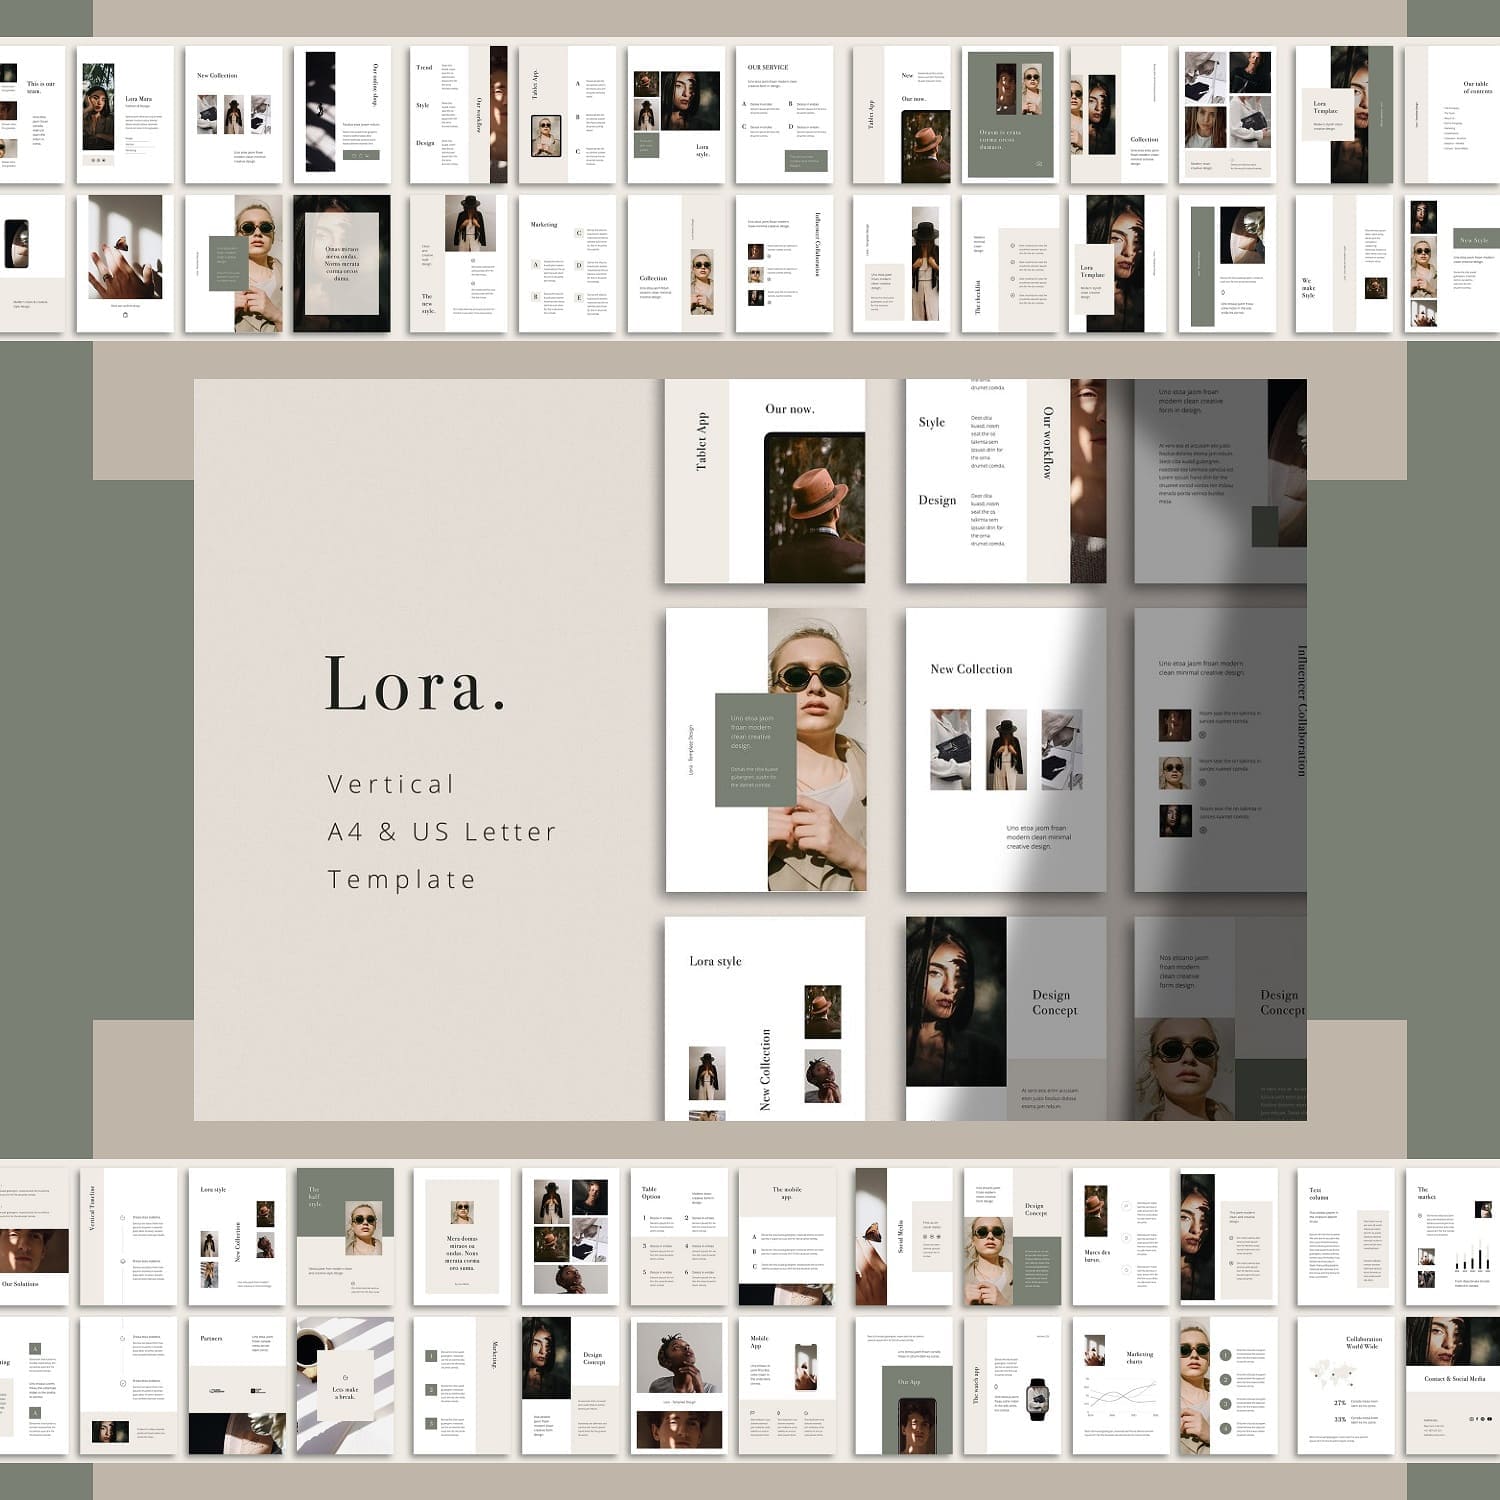 Lora - Vertical A4 & US Letter Template 1500x1500.